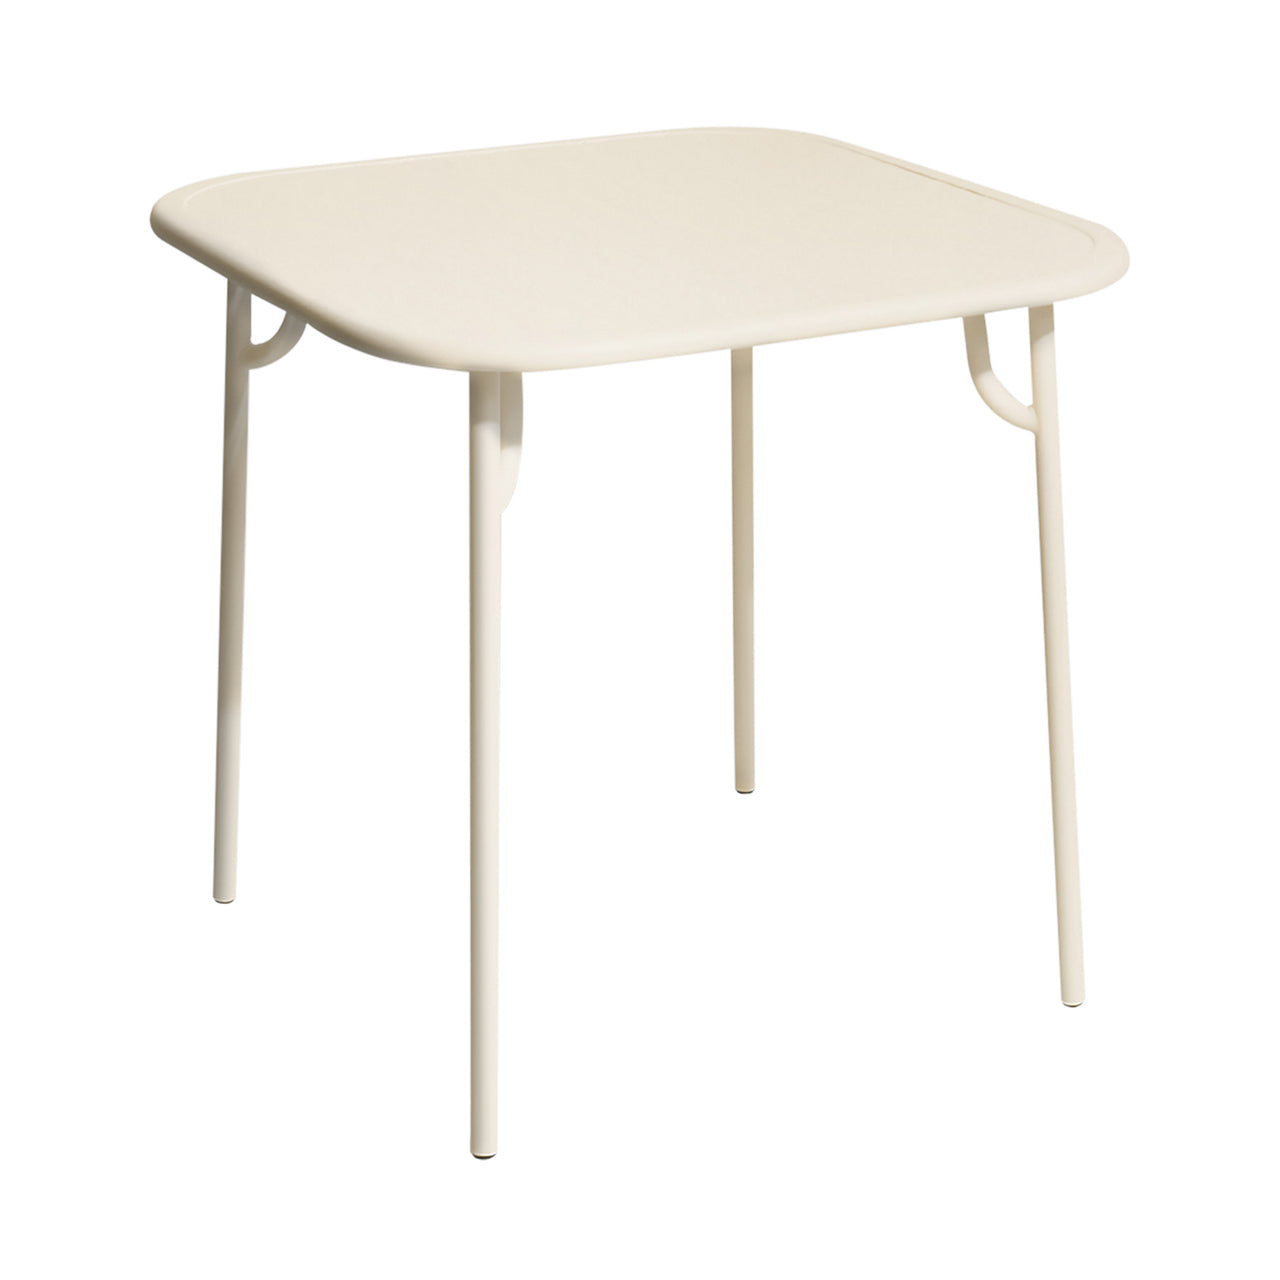 Week-End Square Dining Table: Ivory